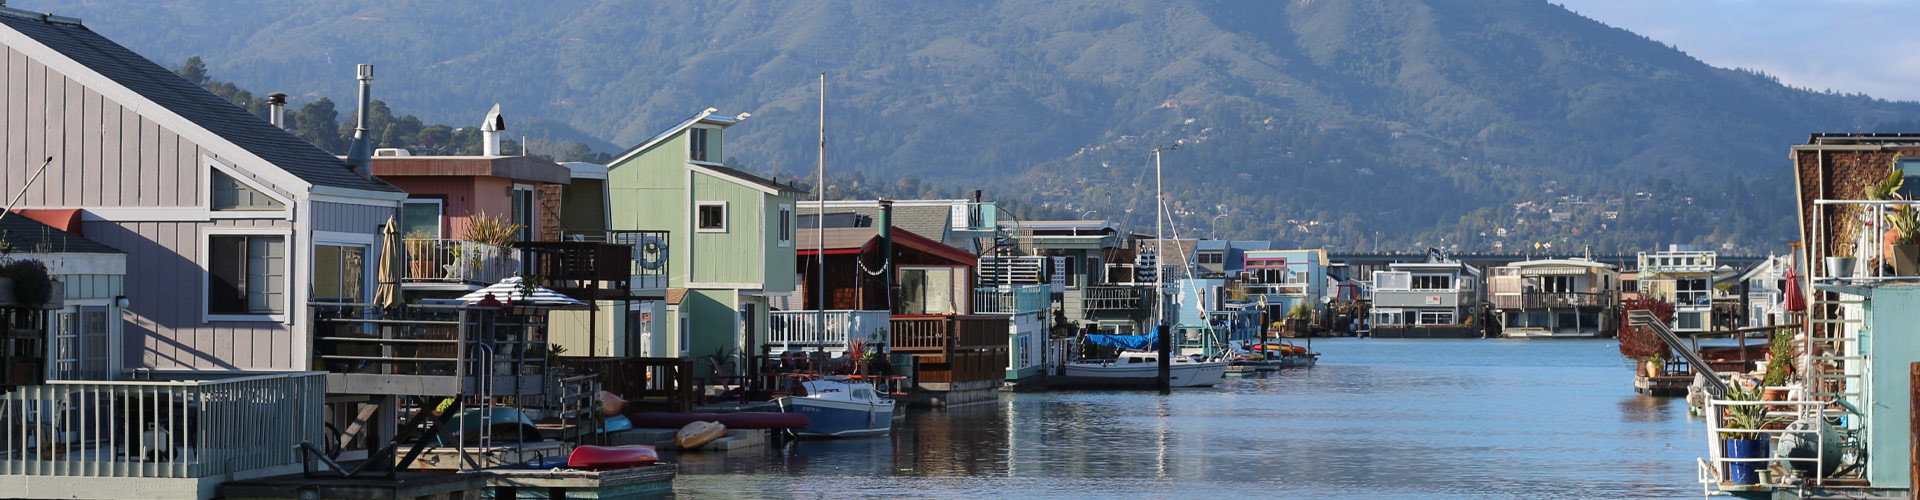 Floating homes in Sausalito